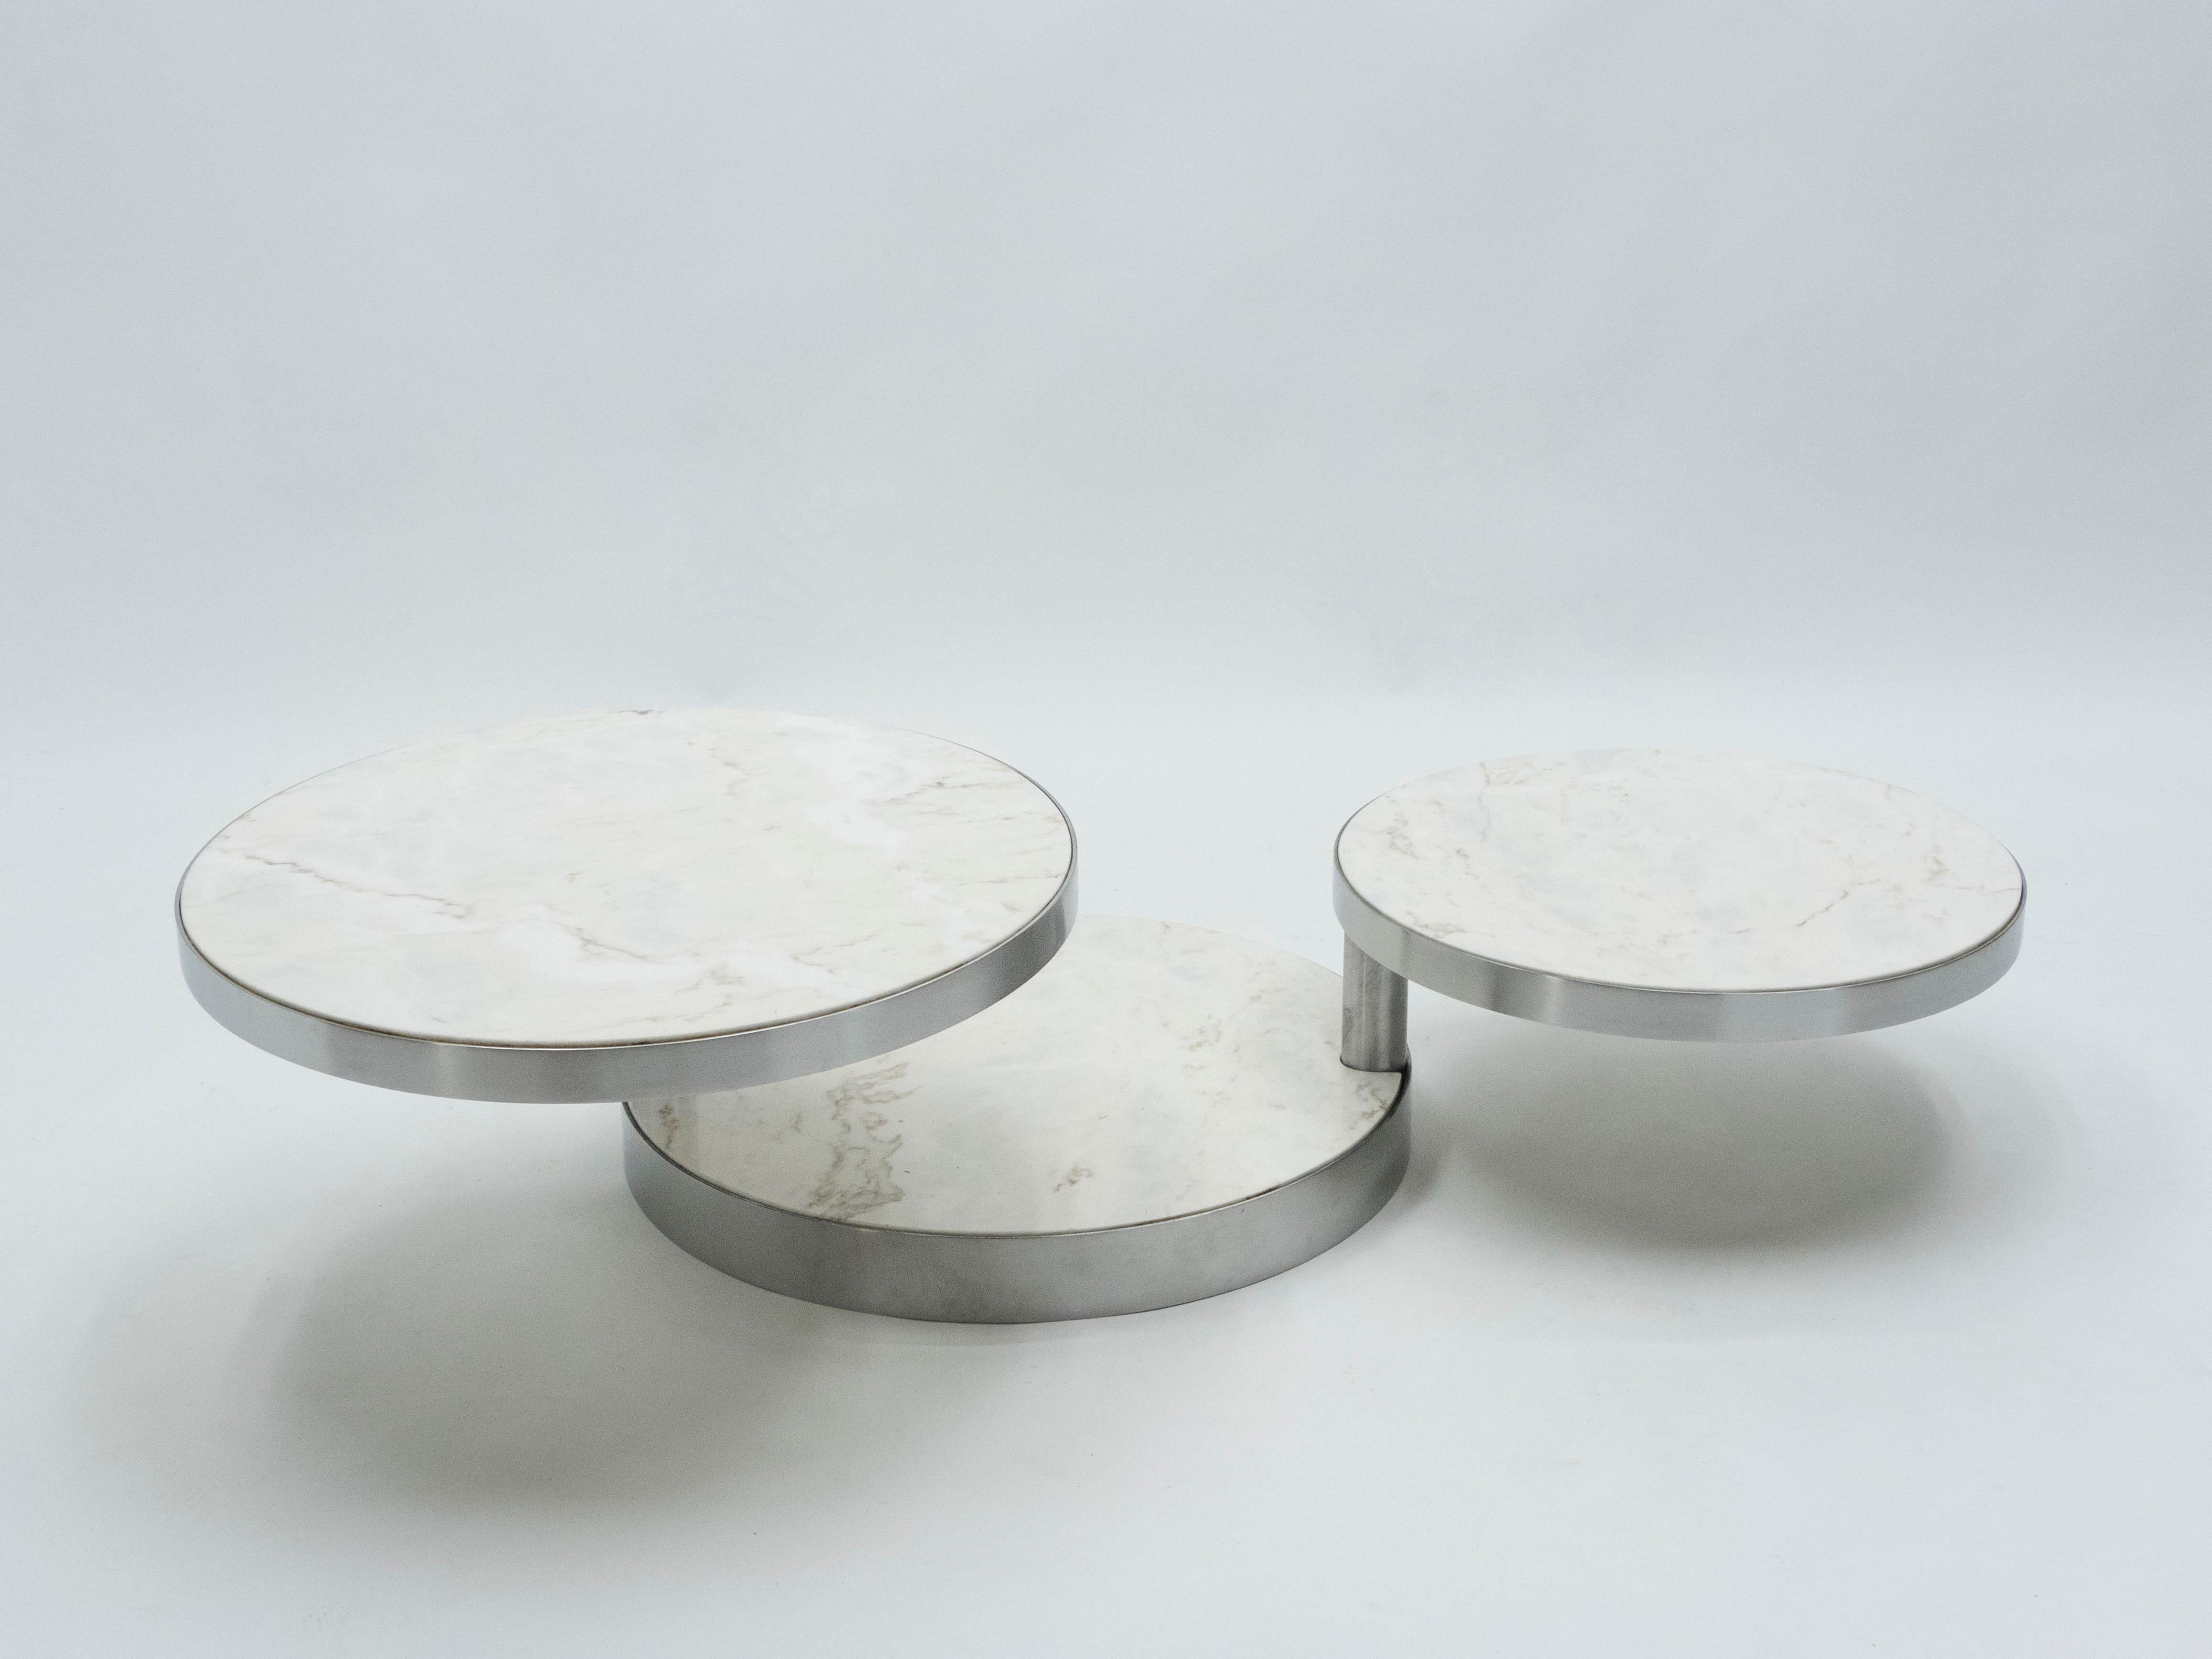 A rare Maison Mercier rounded three-tier swivel table made in France in the early 1970s. It features a brushed steel frame and structure with three white marble levels that can be adjusted and fixed by two handels. This is a quite rare and unique